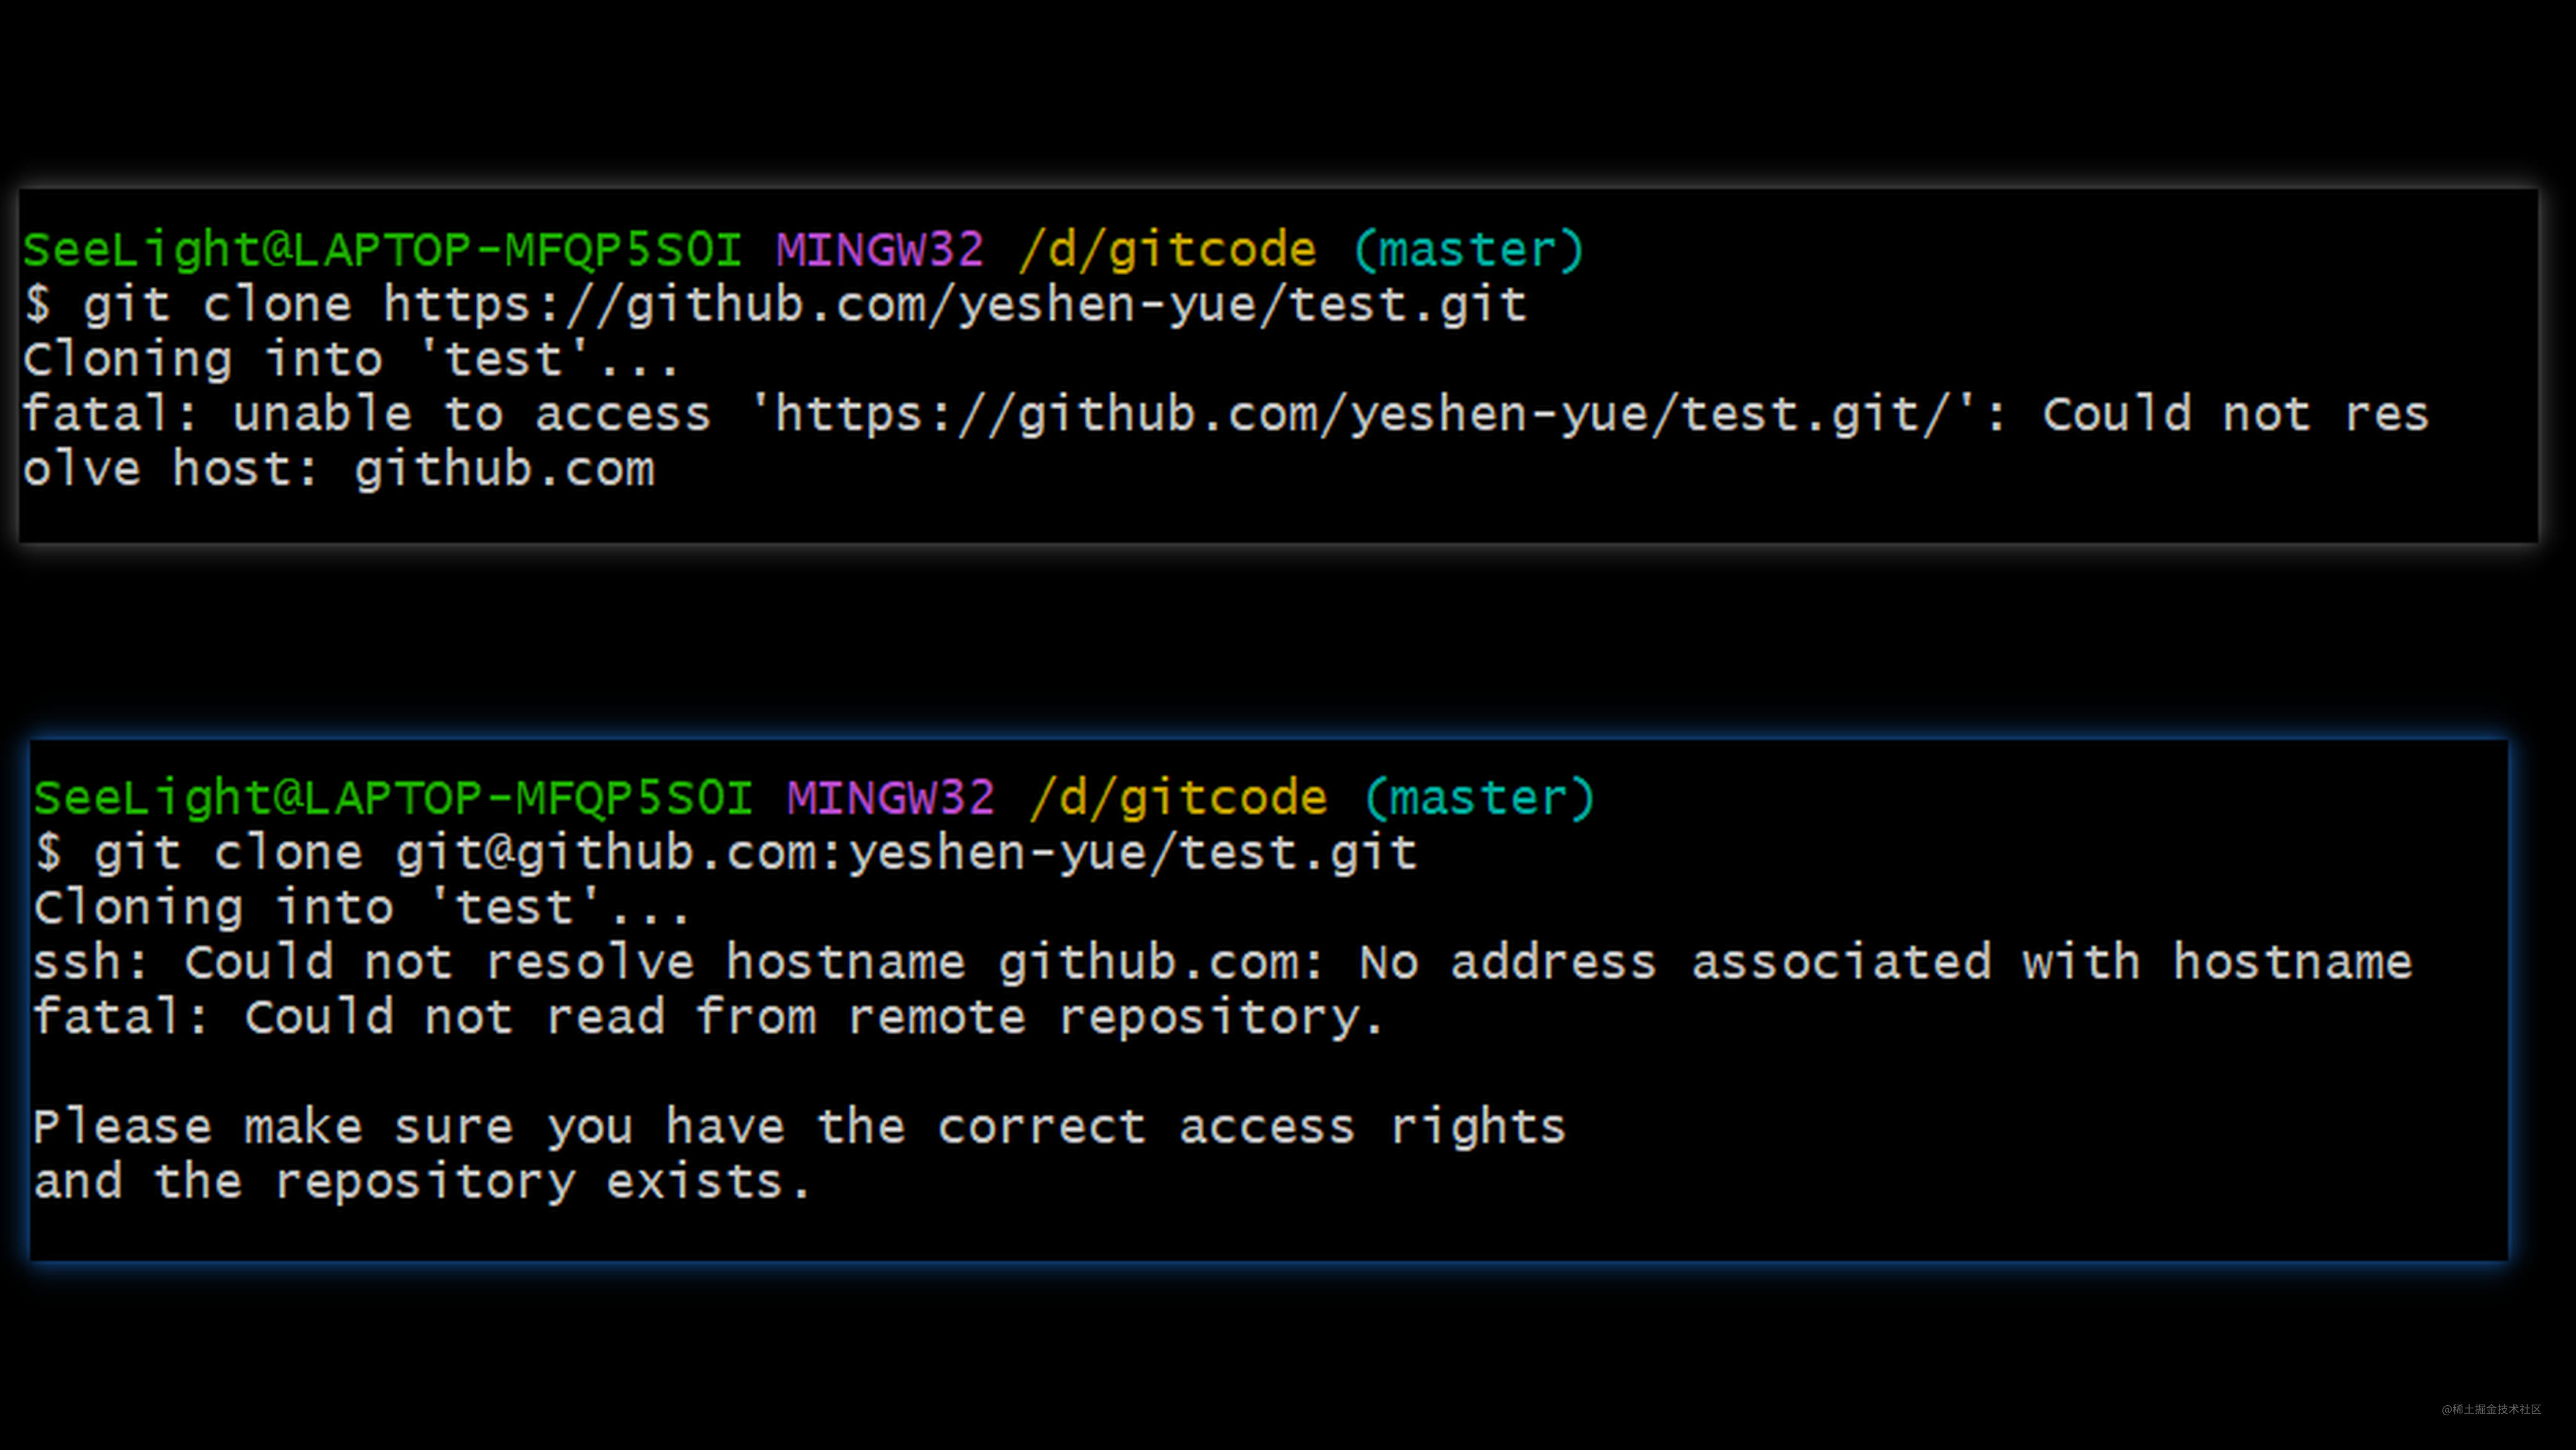 Git fatal unable to access https. Could not resolve HOSTNAME. Could not resolve host.